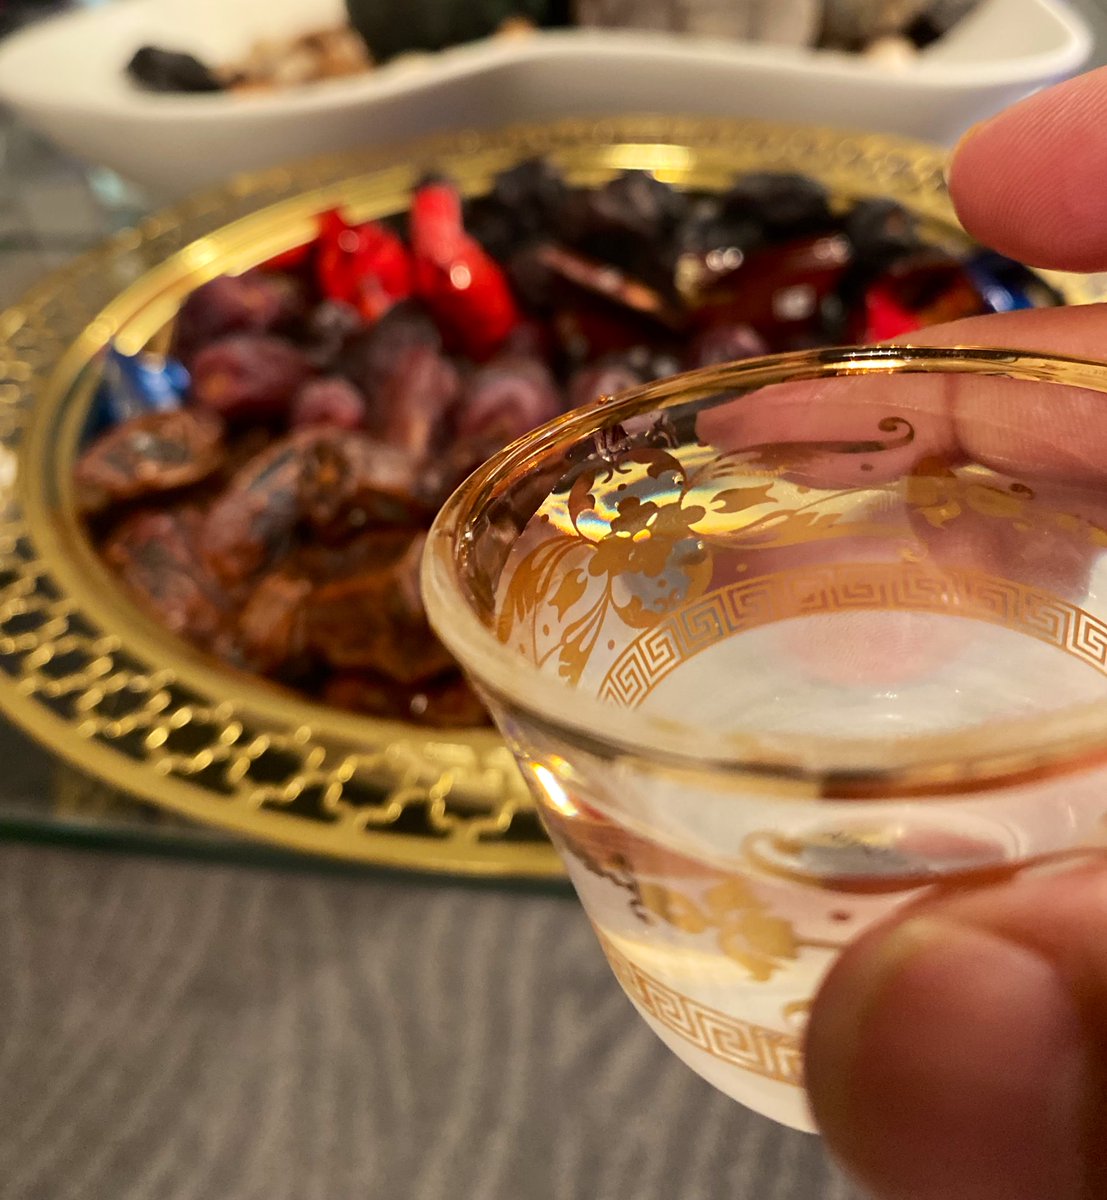 “Just caught up with my friend who arrived from #Umrah! We enjoyed the refreshing #zamzam water and indulged in delicious #dates. Wish I was there experiencing the #spiritual journey too” #Alhamdulillah #Umrah2024 #Makkah #Madinah #SaudiArabia